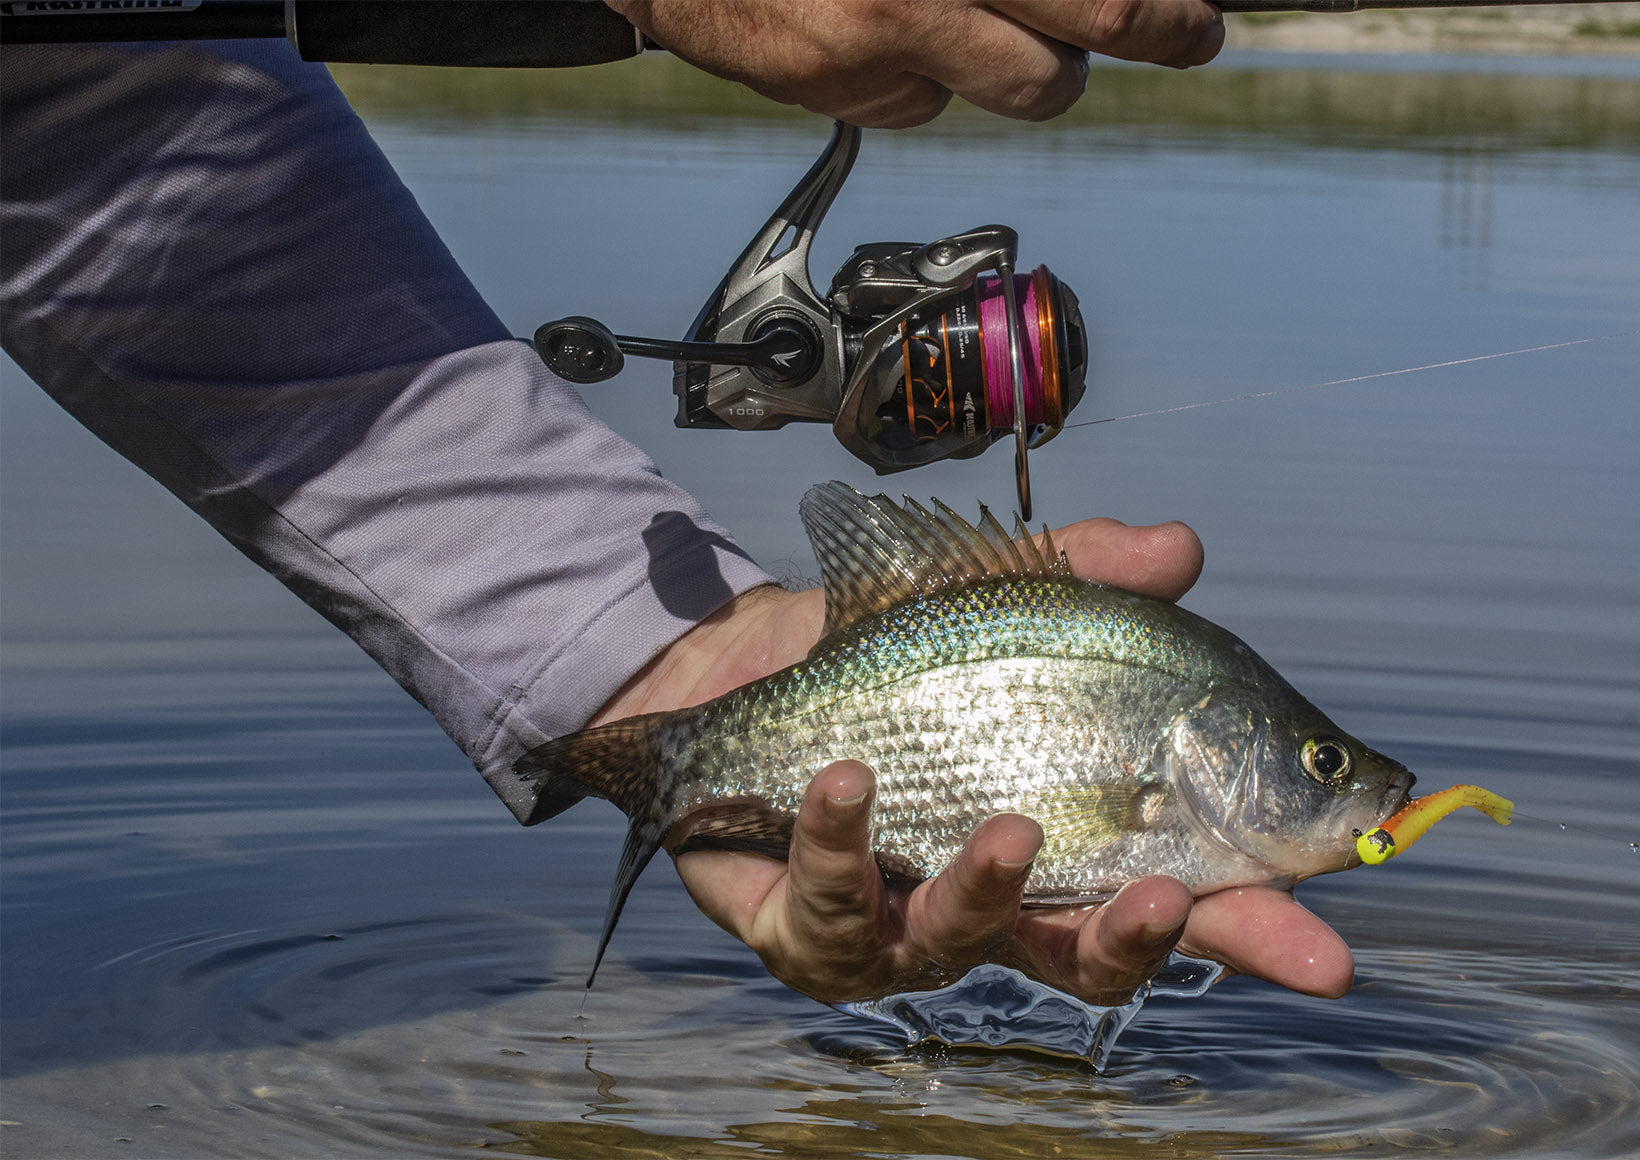 Buyer's Guide: BFS (Bait Finesse System) Rod and Reel Combos – KastKing